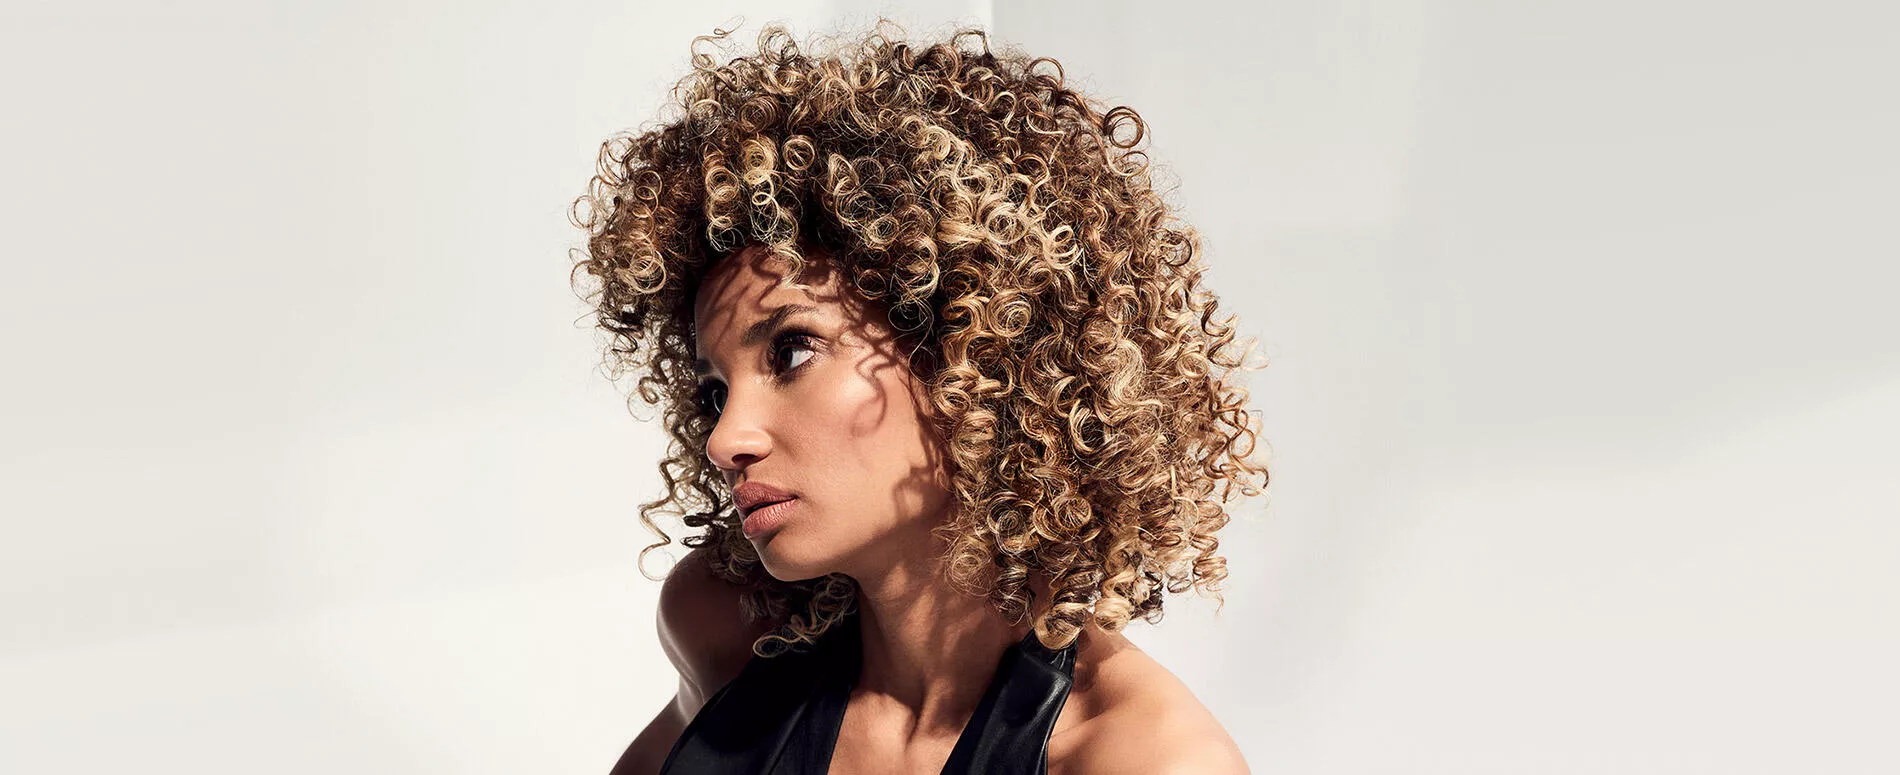 Model with curly, highlighted hair looks to the side